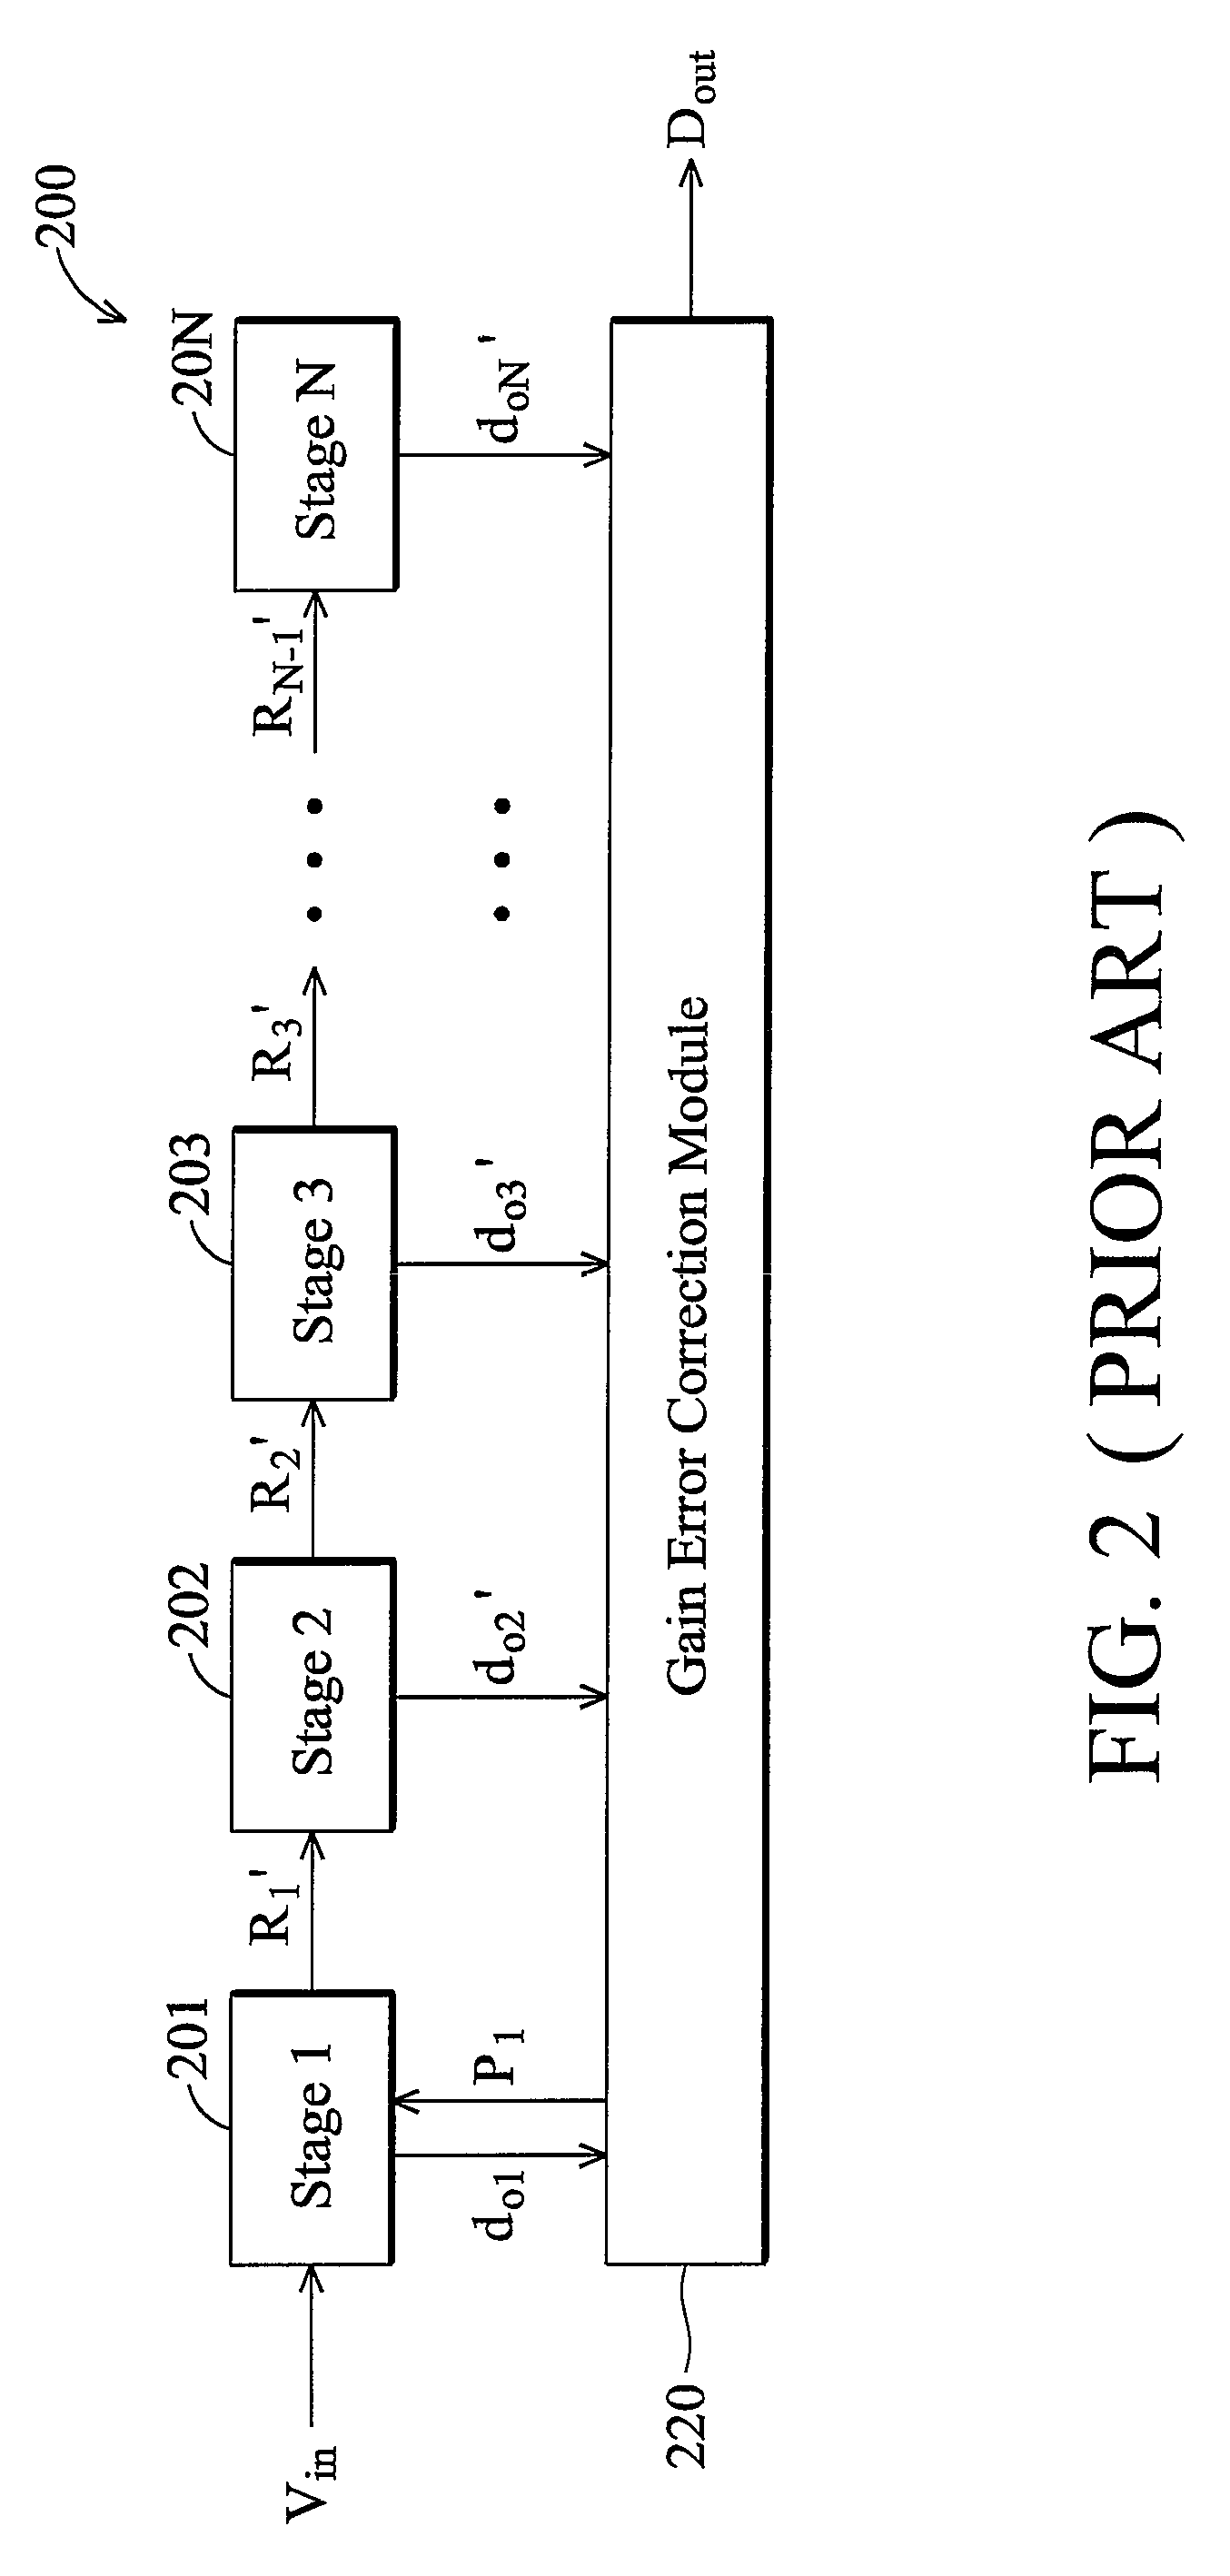 Method of gain error calibration in a pipelined analog-to-digital converter or a cyclic analog-to-digital converter